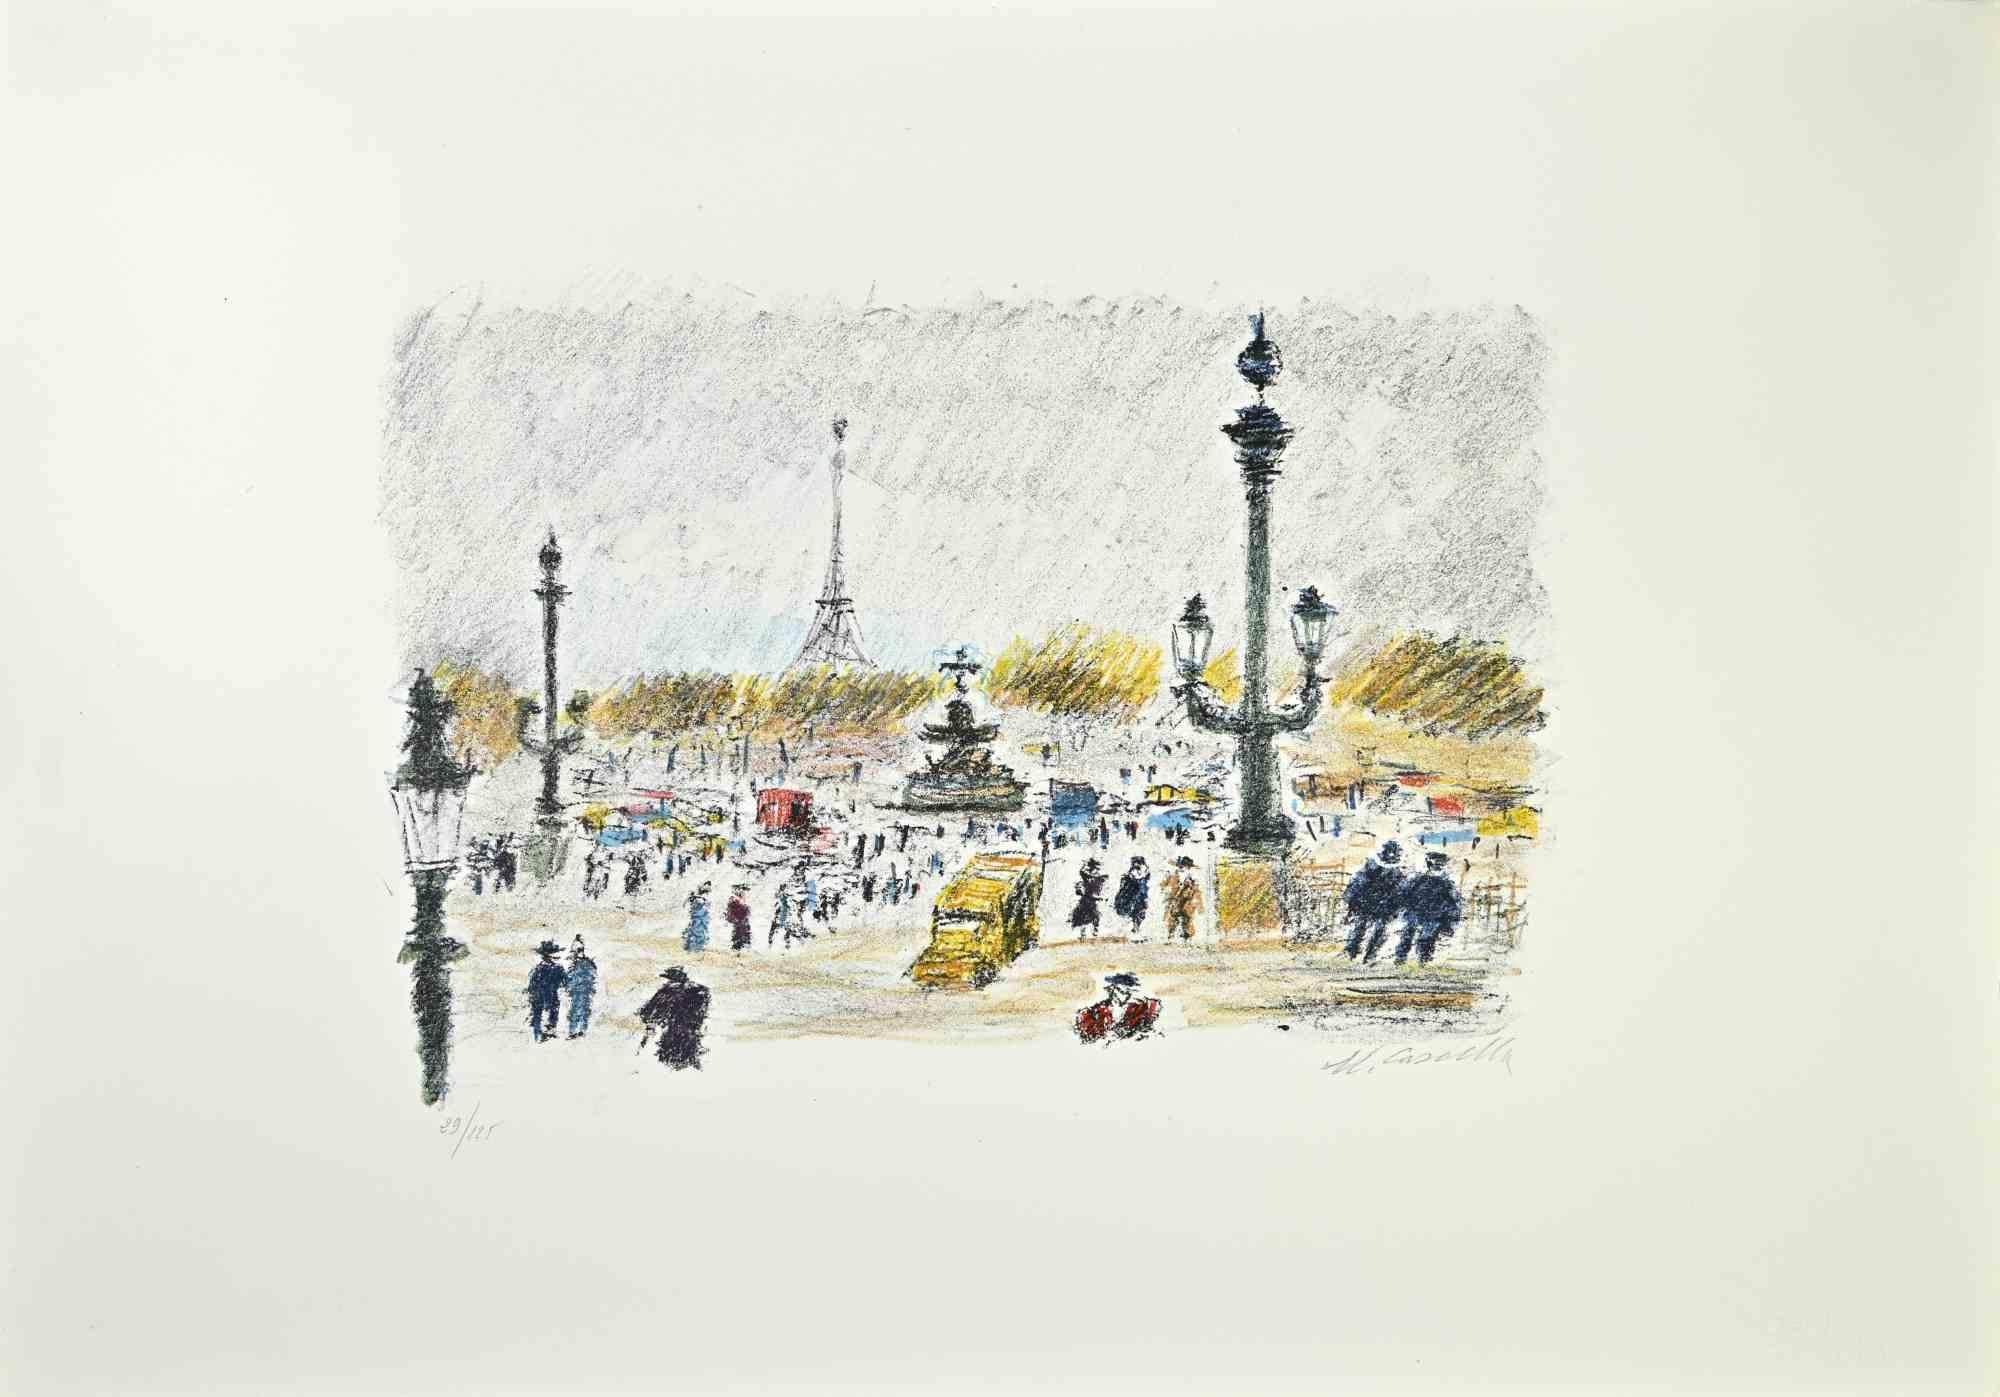  Paris along the River Seine is an artwork realized in 1979, by the Italian Artist Michele Cascella.

Colored lithograph on paper of the Portfolio "Landscape", 1979, with six original lithograph and the poems of Franco Simongini titled "Twenty